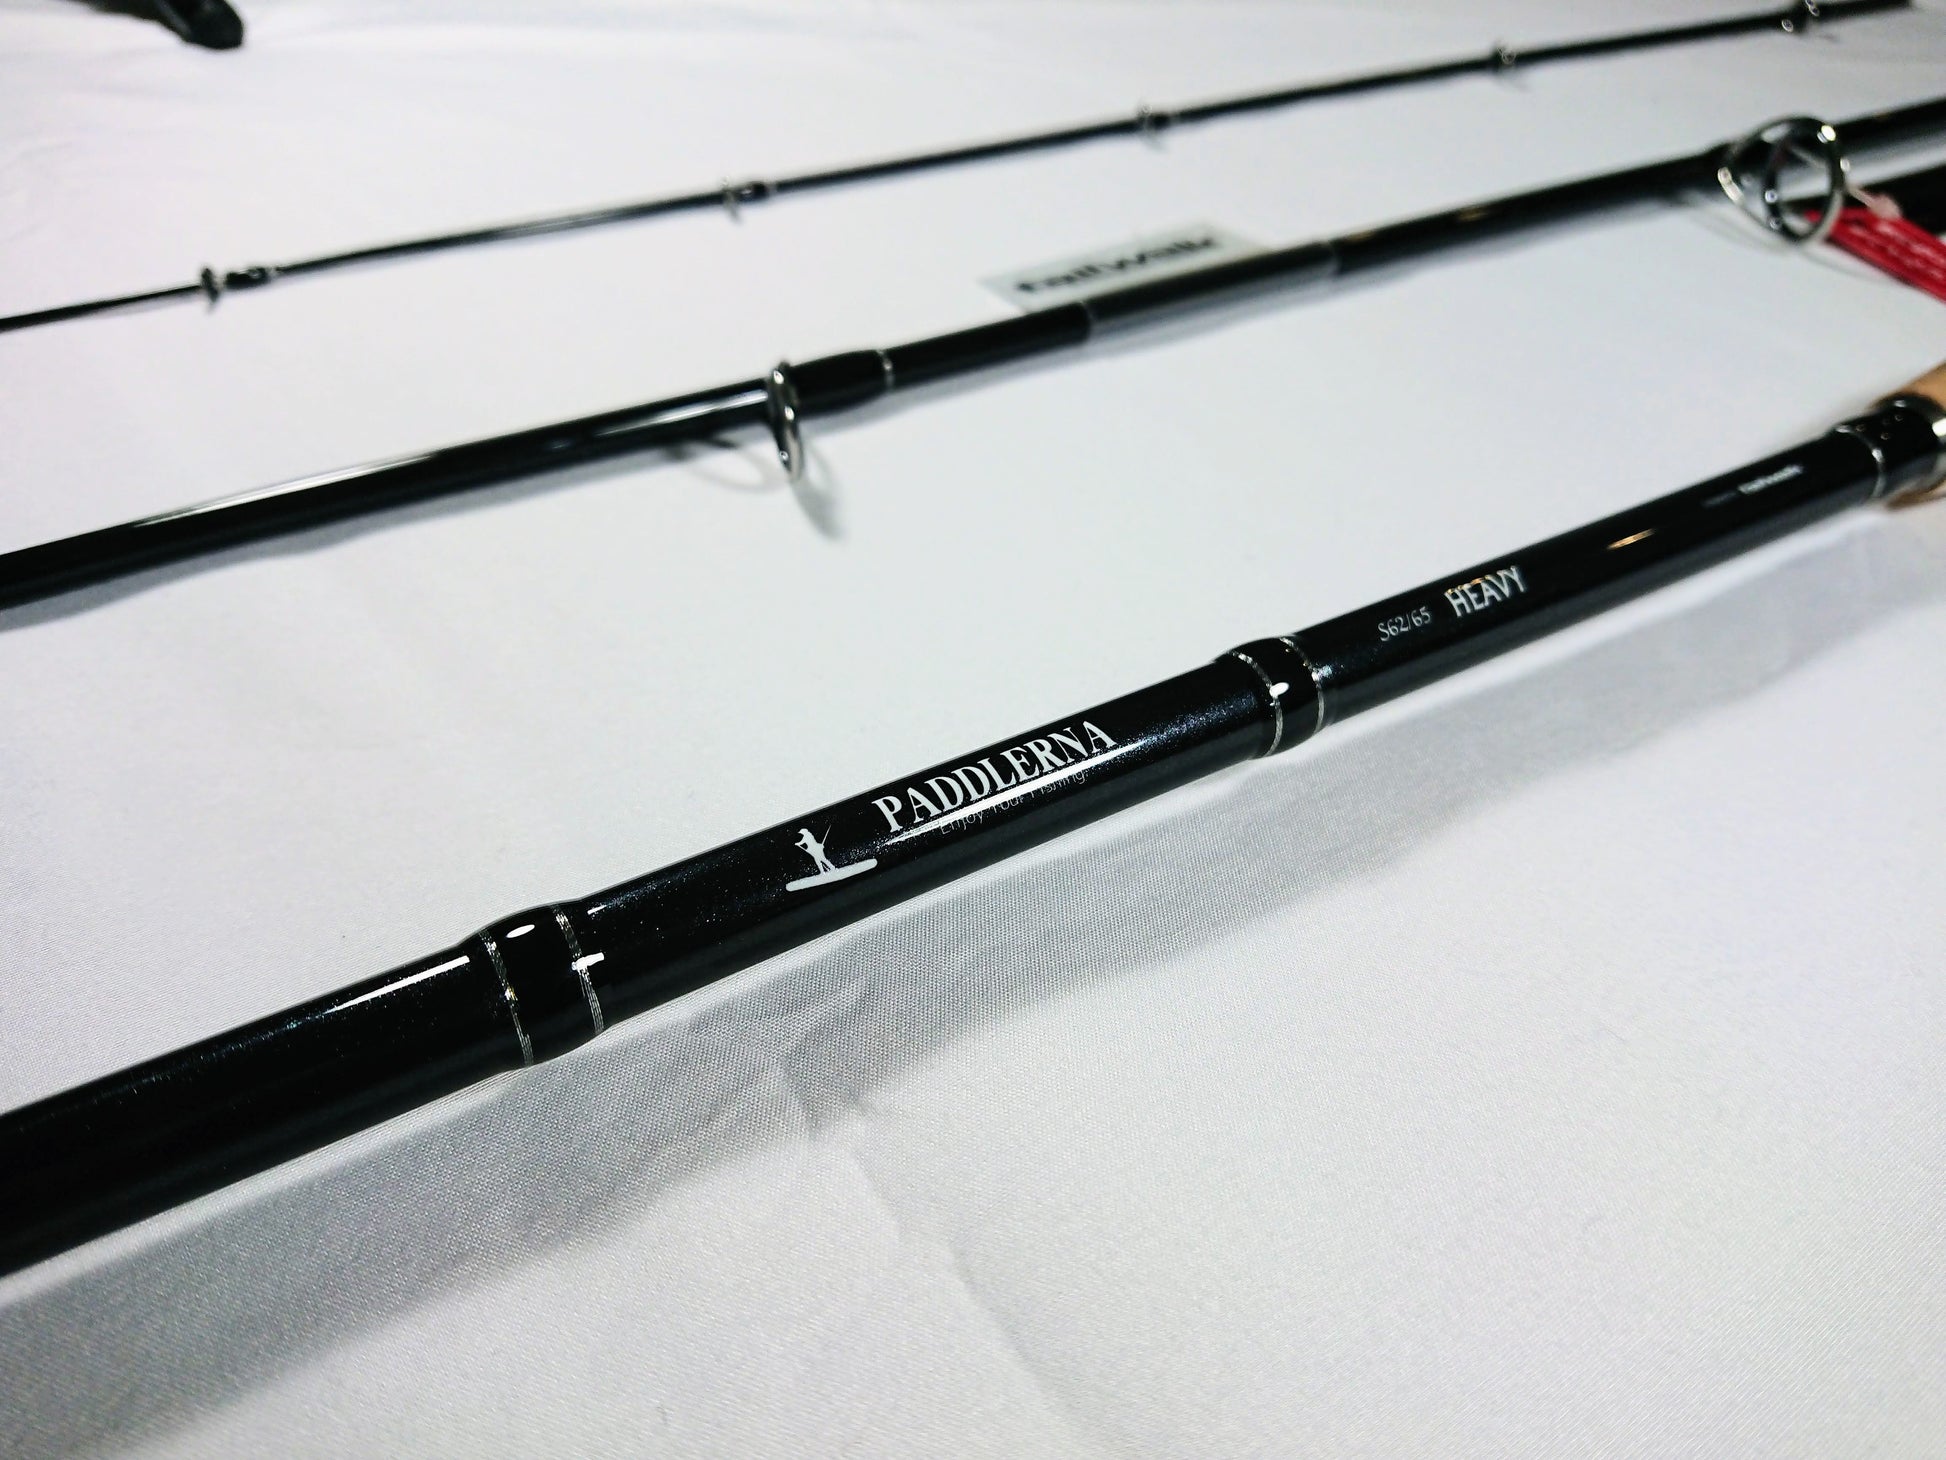 Taiwalk PADDLERNA S62/69 HEAVY Kayak Fishing Rod zoom in view of butt section to rod spec